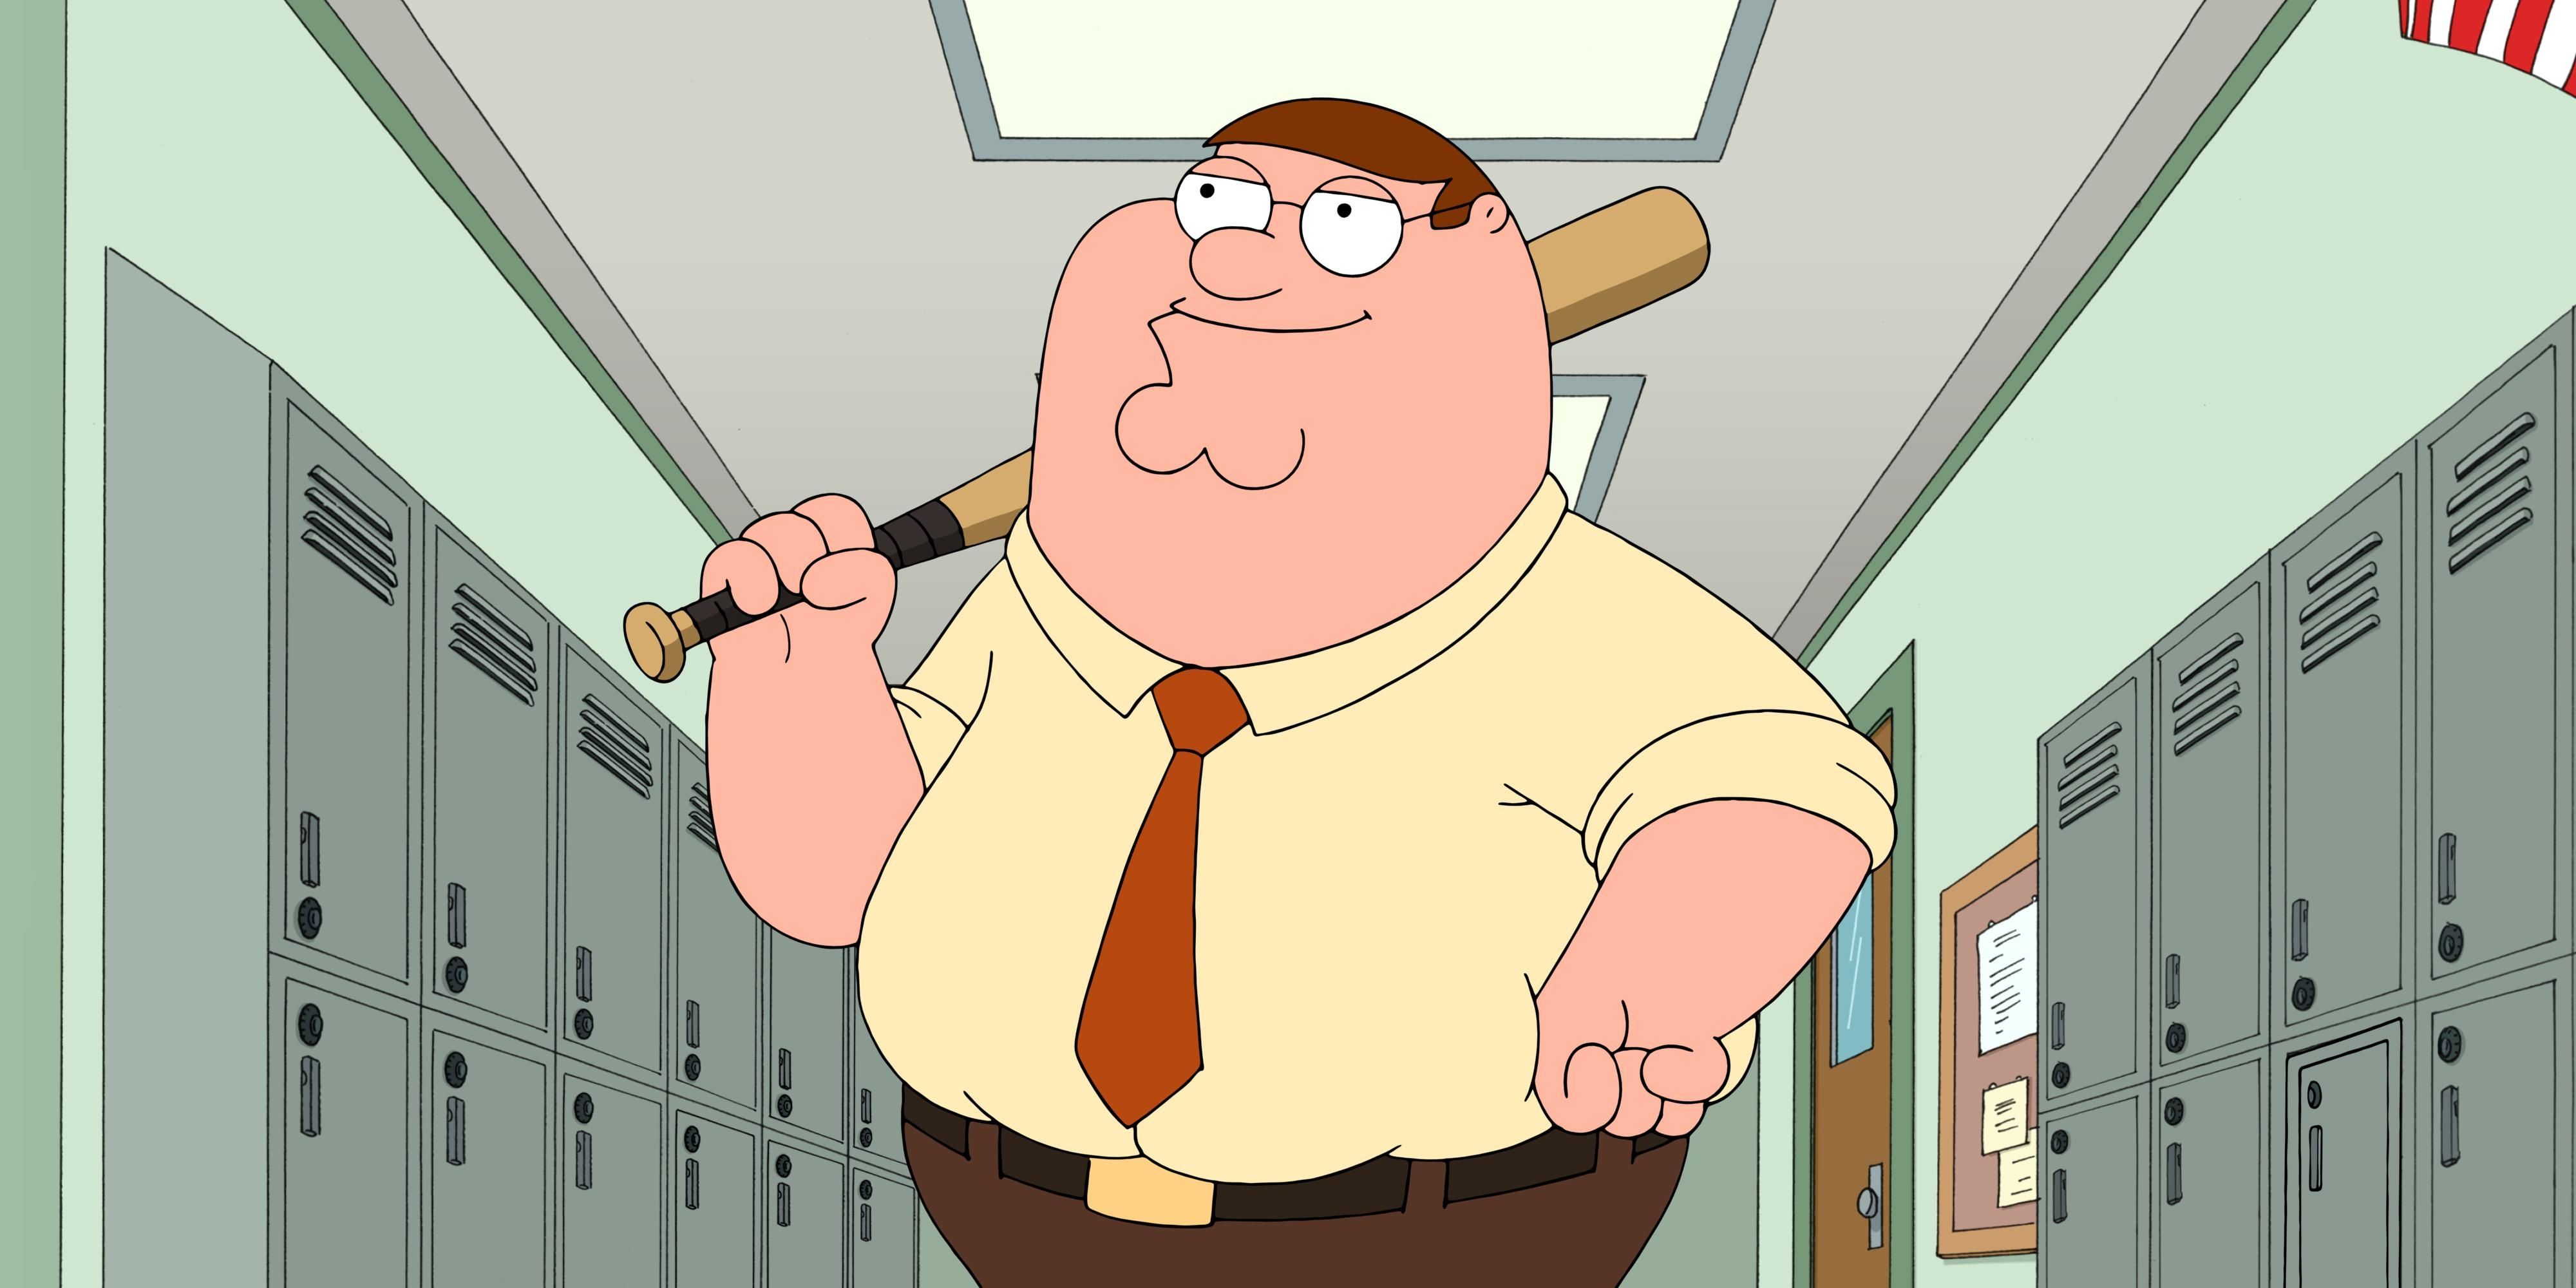 Peter Griffin Walking Through the School With A Bat